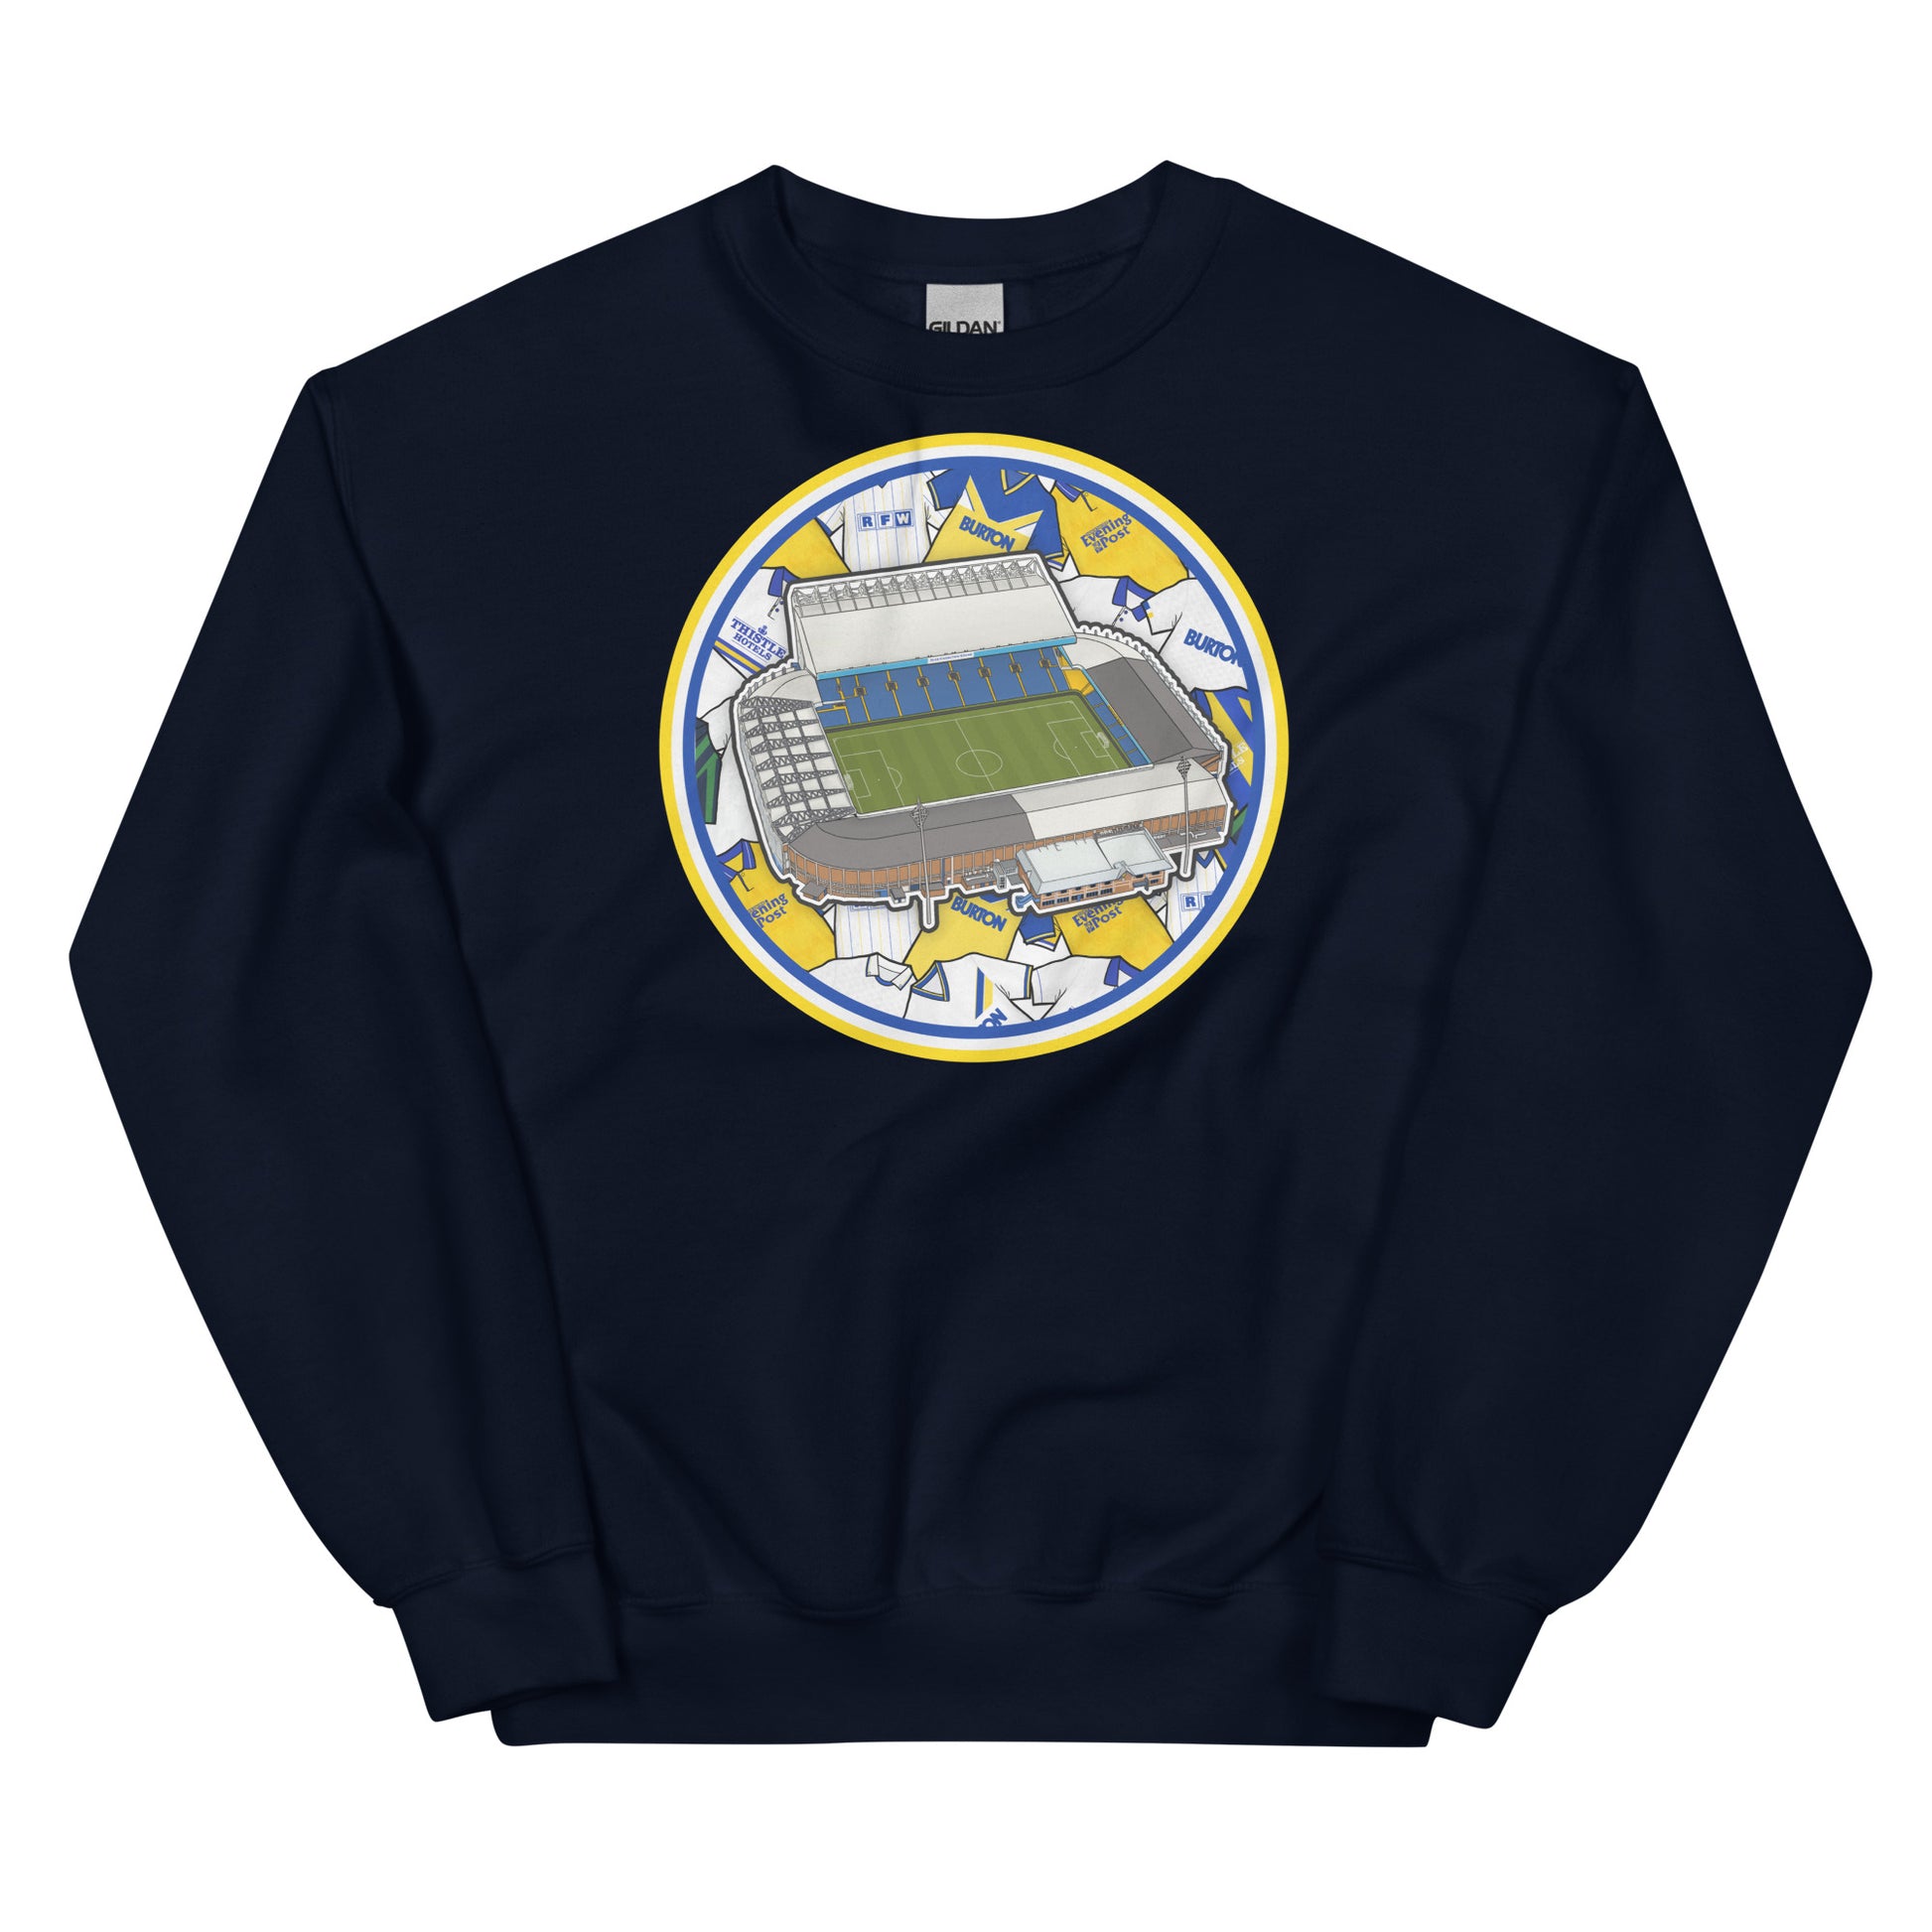 Navy Blue Sweatshirt Inspired by the home of Leeds United in West Yorkshire, Elland Road Stadium with Retro Themed Illustrated Artwork Behind it